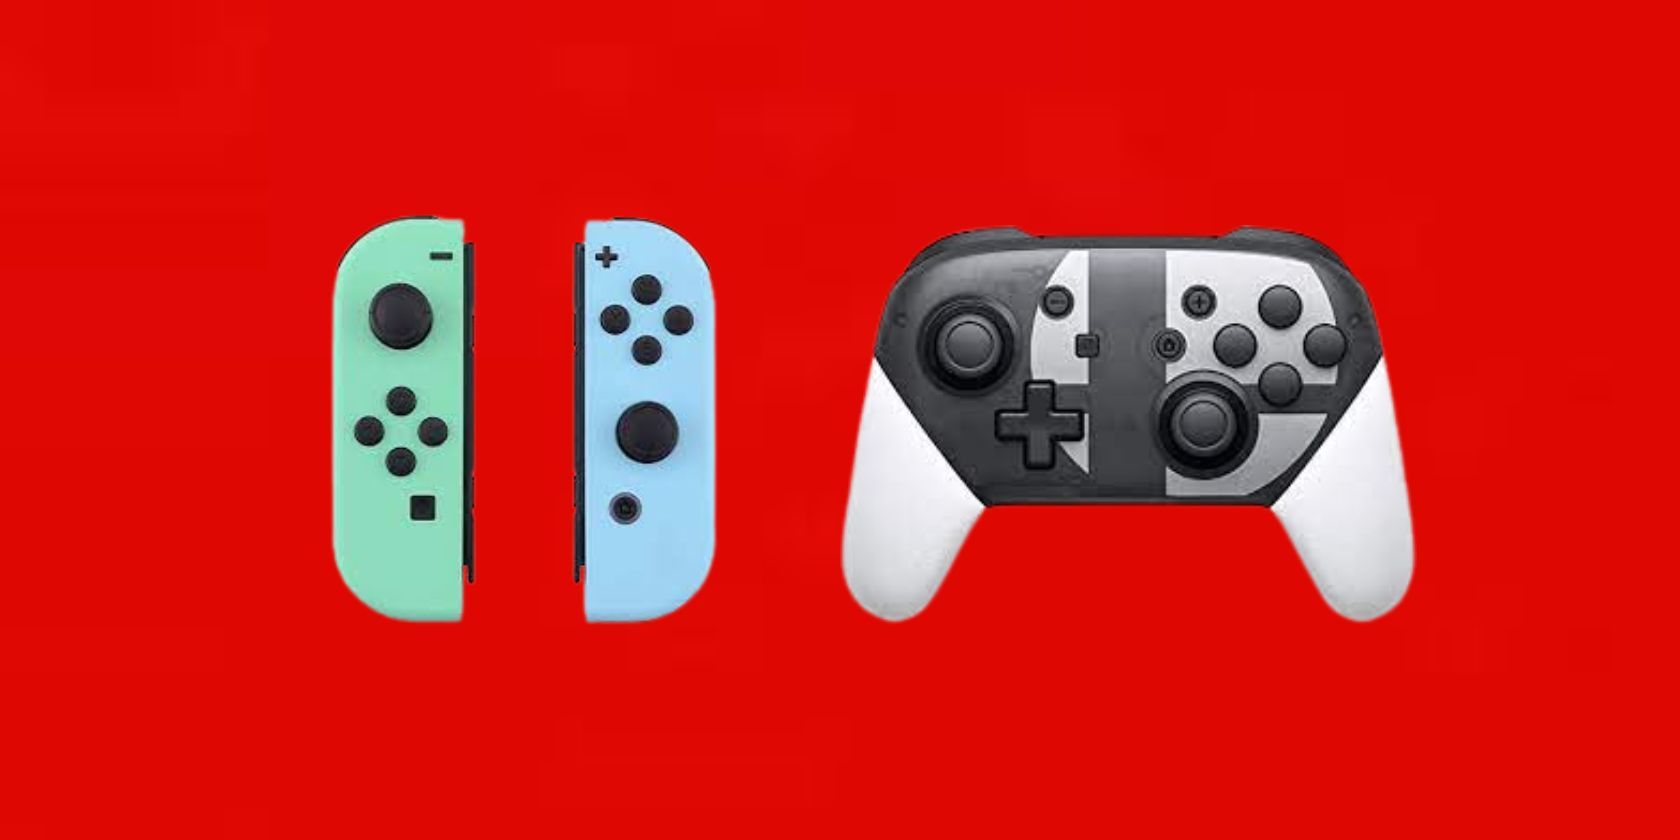 The Joy Cons and Pro Controller over a red background